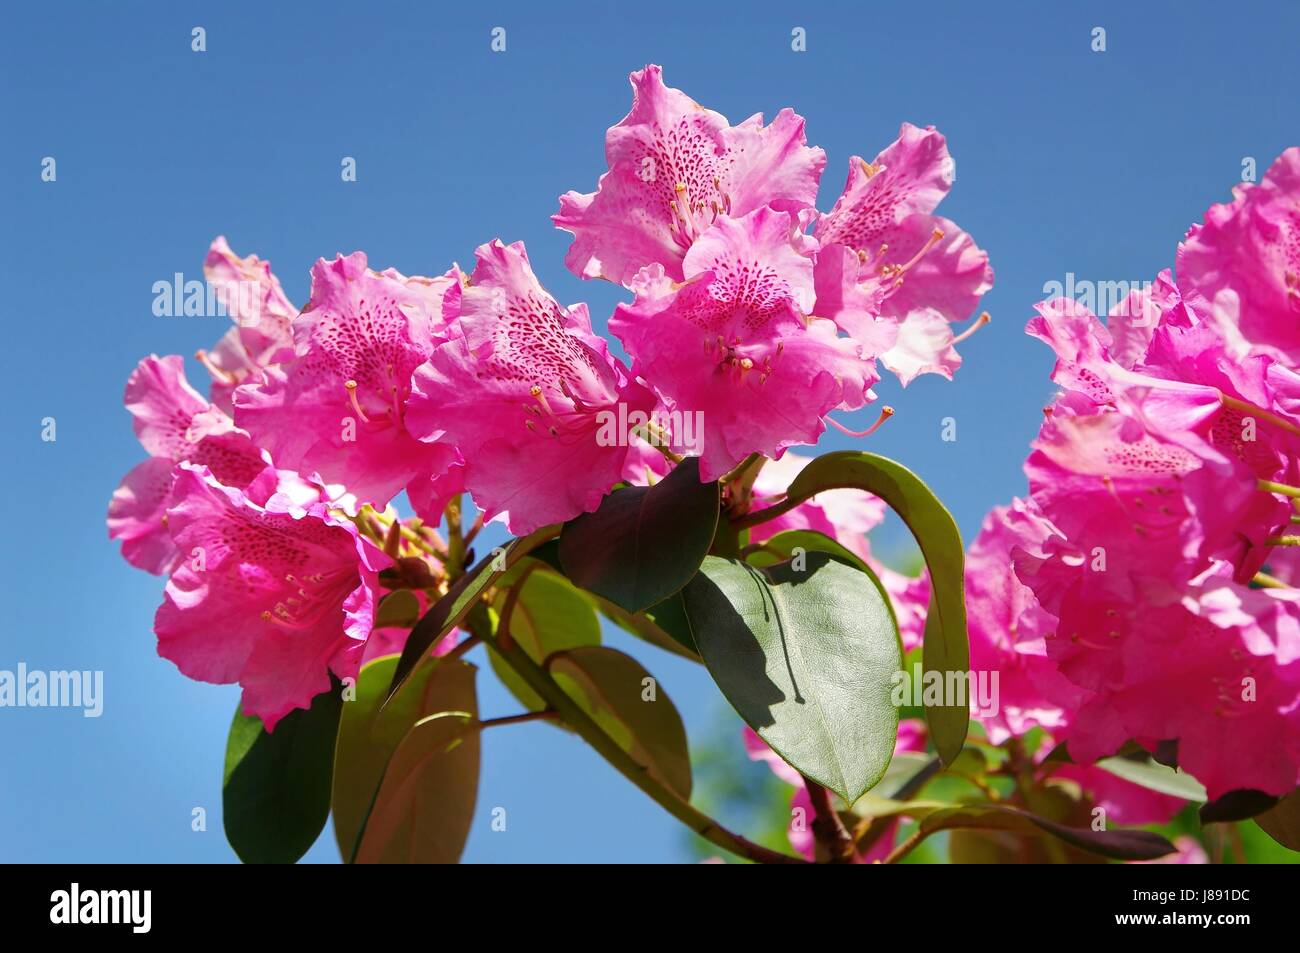 detail, garden, blossoms, rhododendron, gardens, bleed, design, shaping, Stock Photo